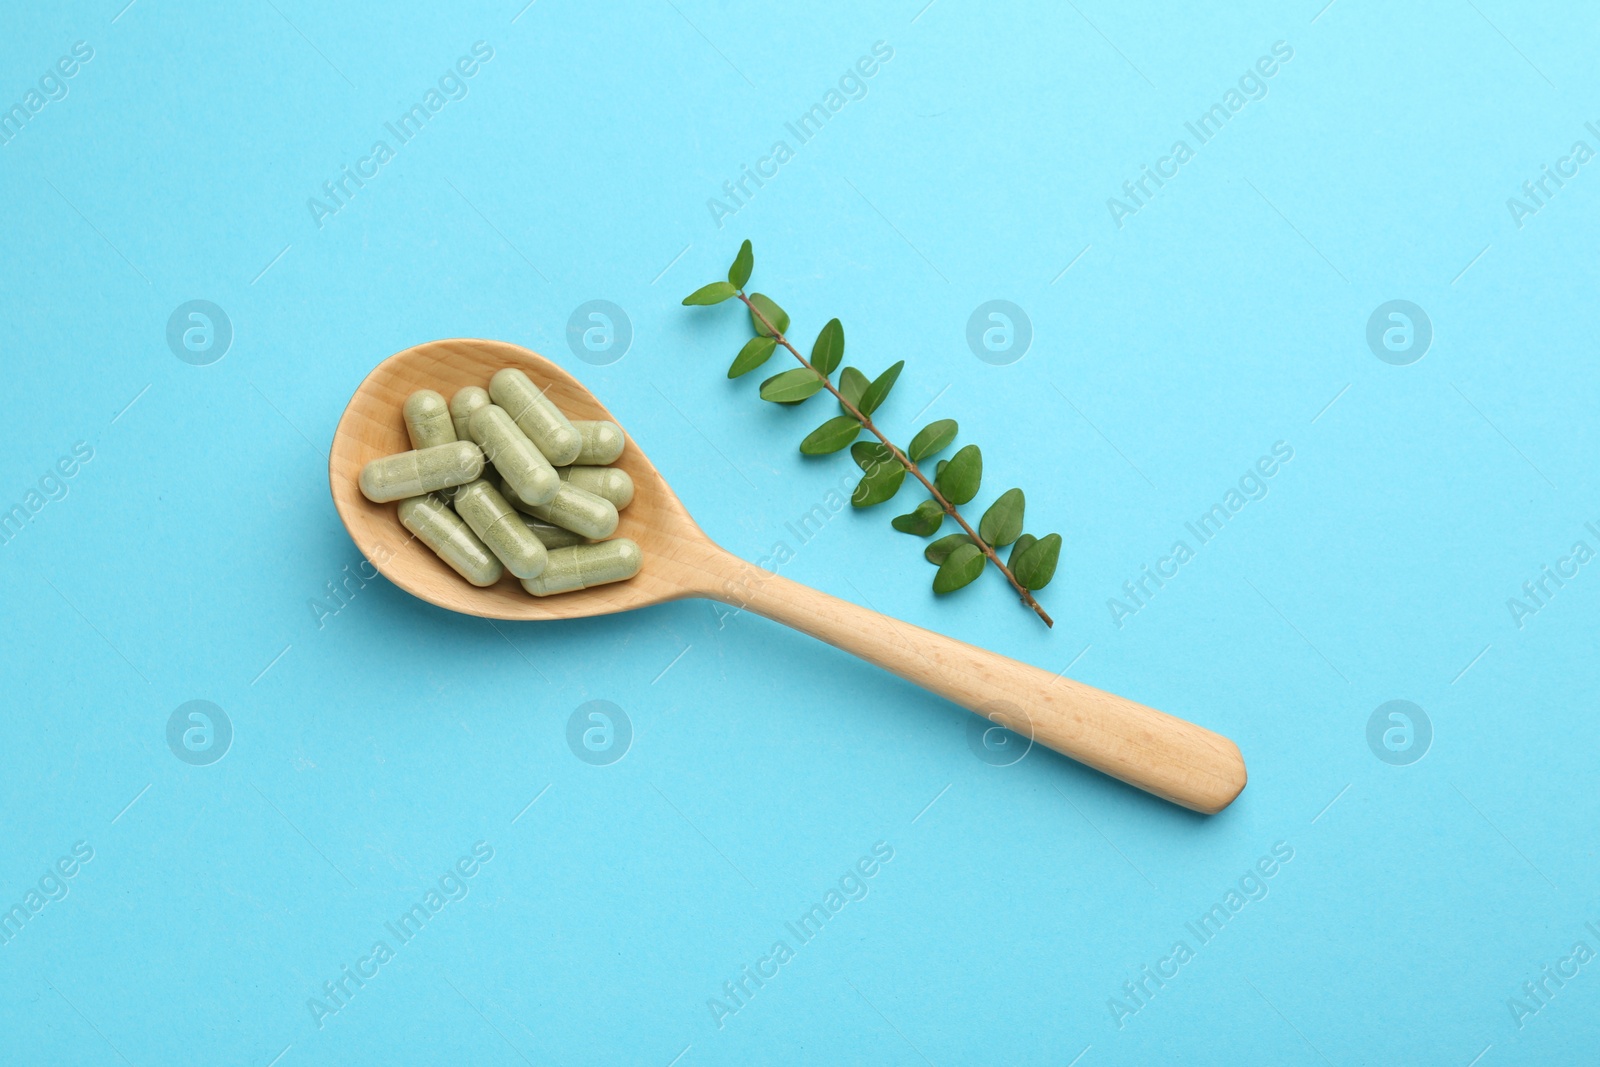 Photo of Vitamin capsules in spoon and green branch on light blue background, flat lay